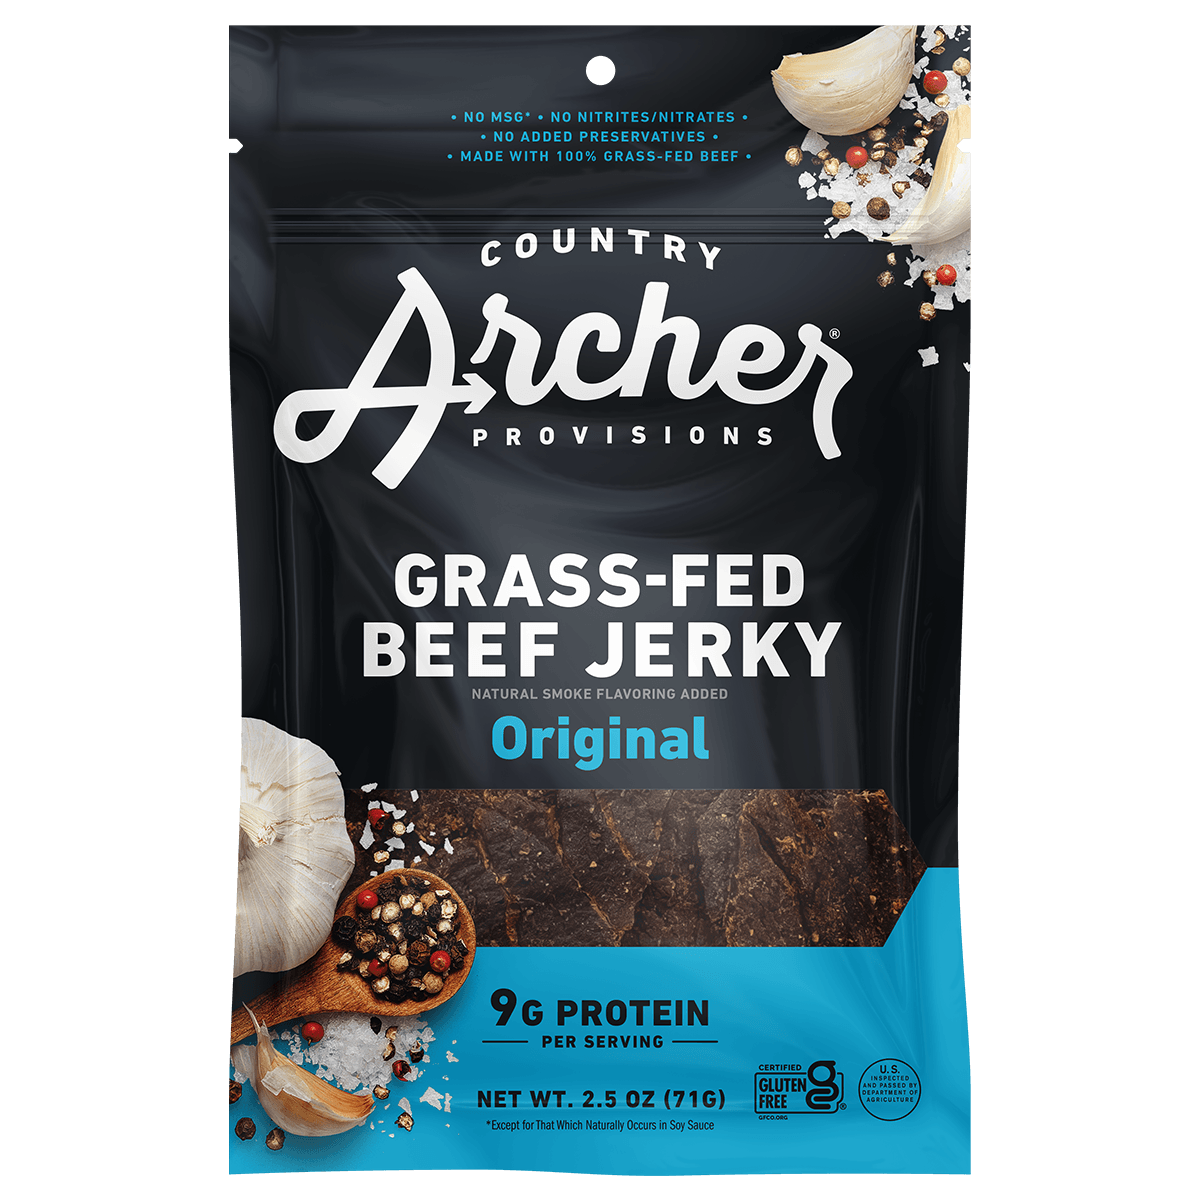 Jerky | 100% Grass-Fed Beef Jerky – Country Archer Provisions